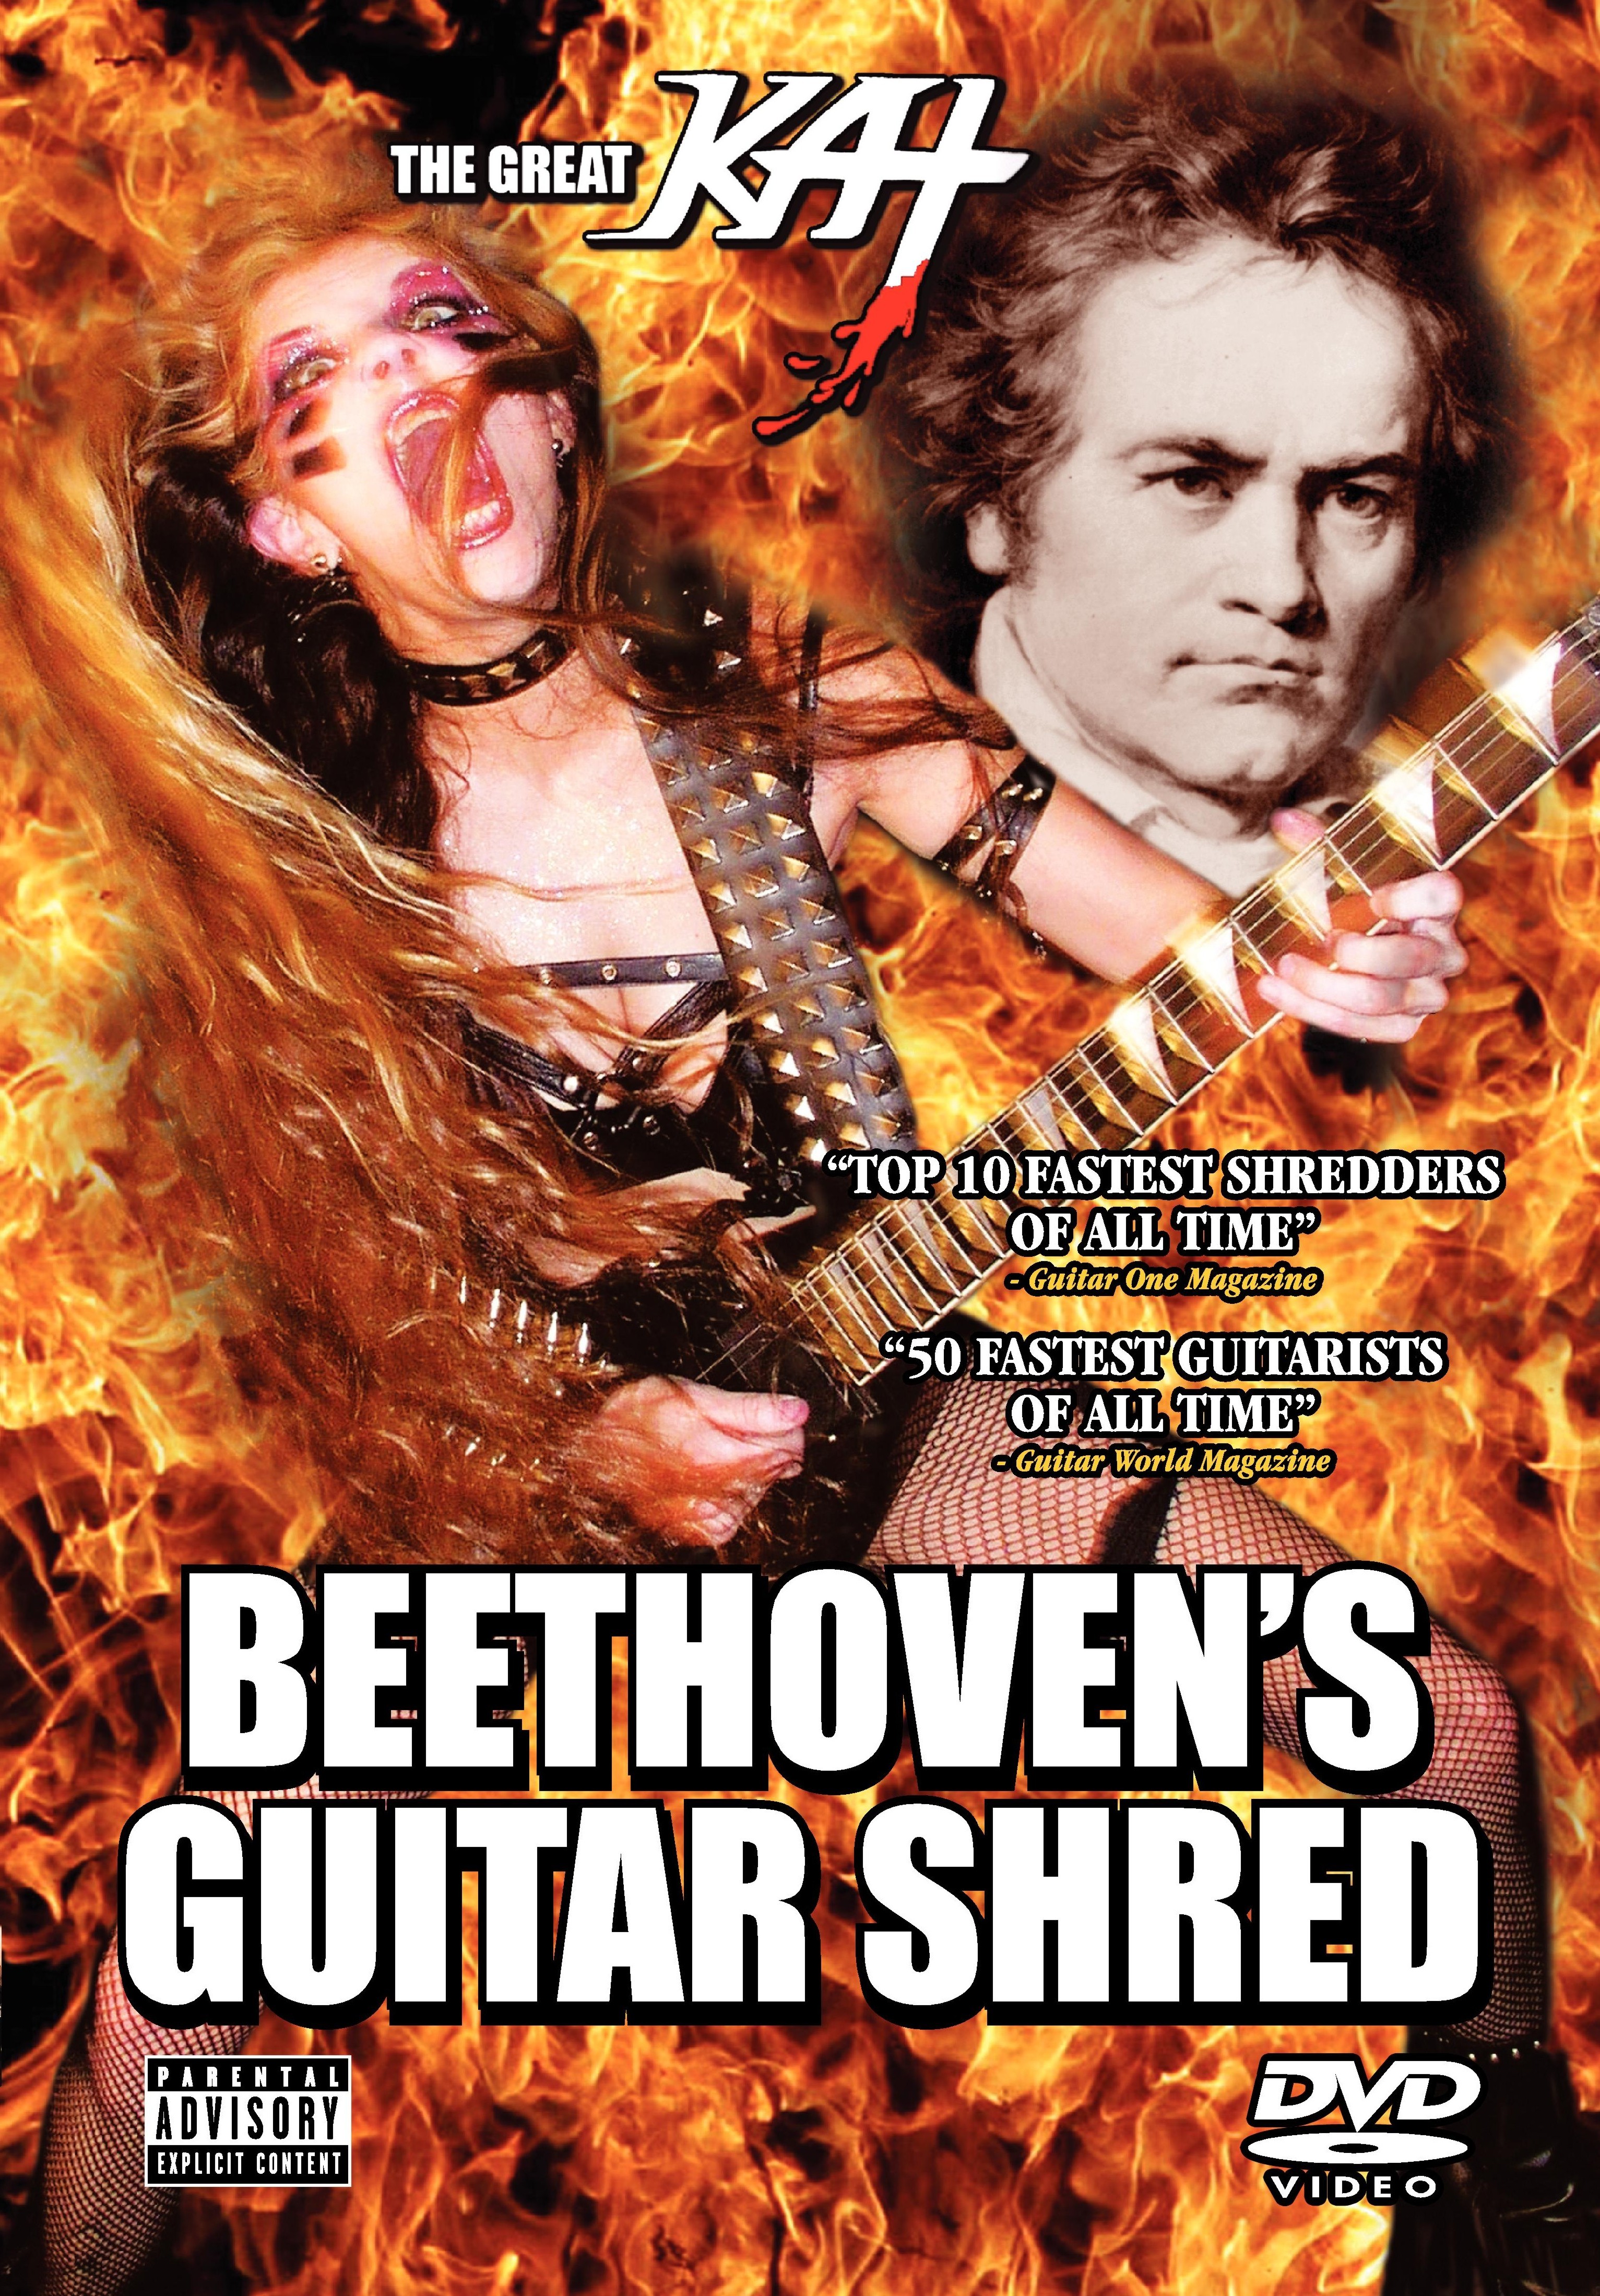 The Great Kat S New Masterpiece Beethoven S Guitar Shred Dvd Is